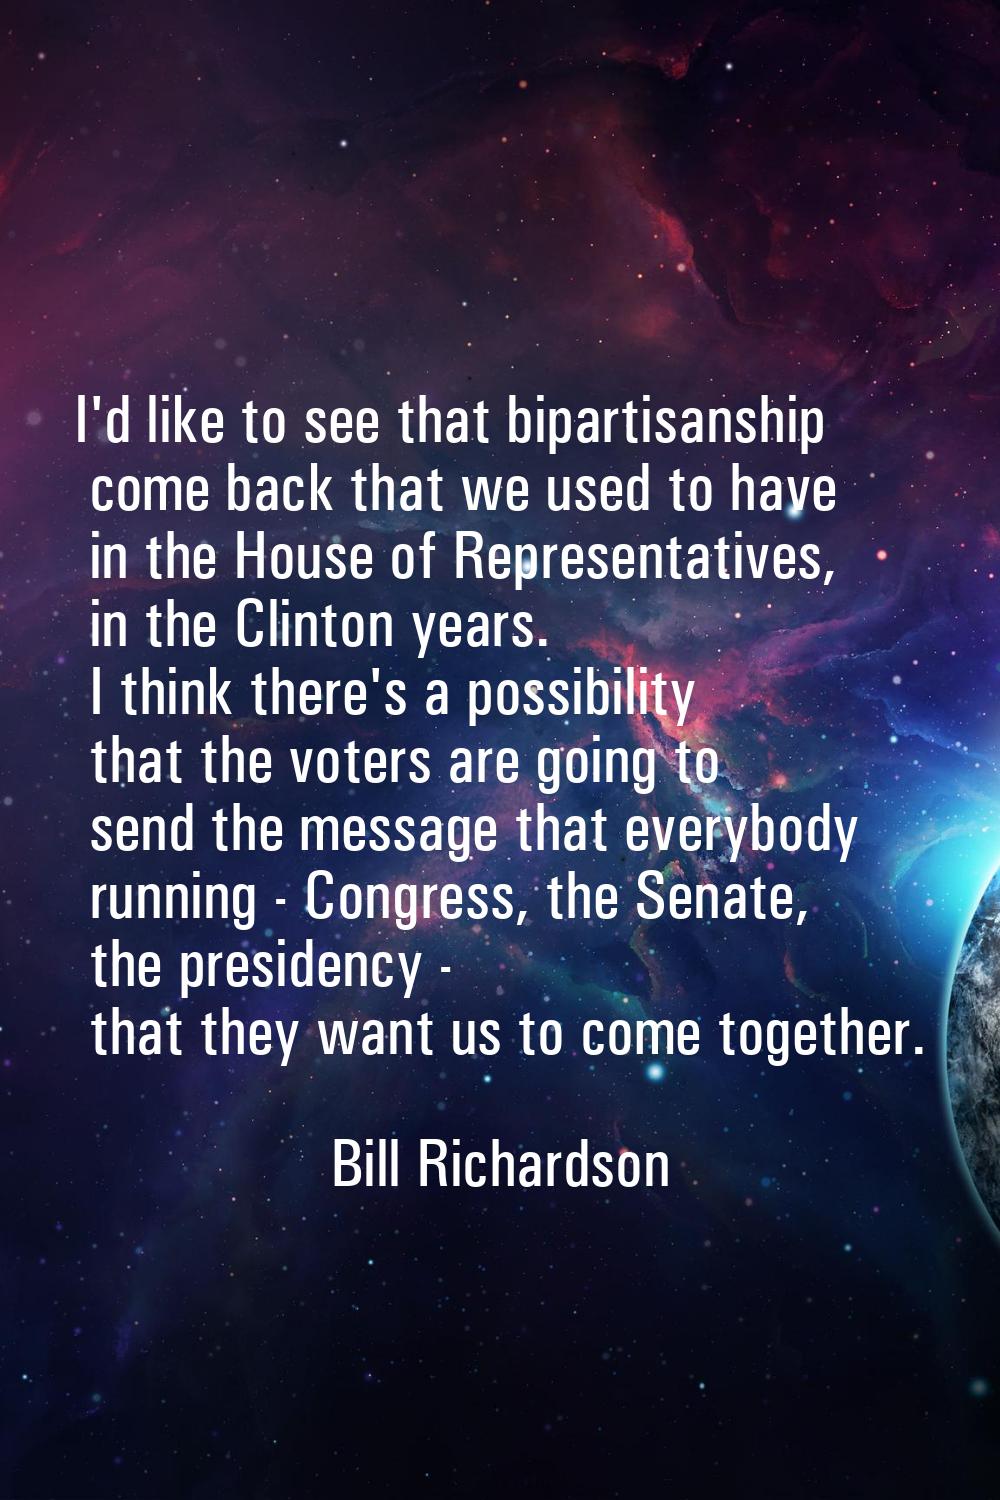 I'd like to see that bipartisanship come back that we used to have in the House of Representatives,